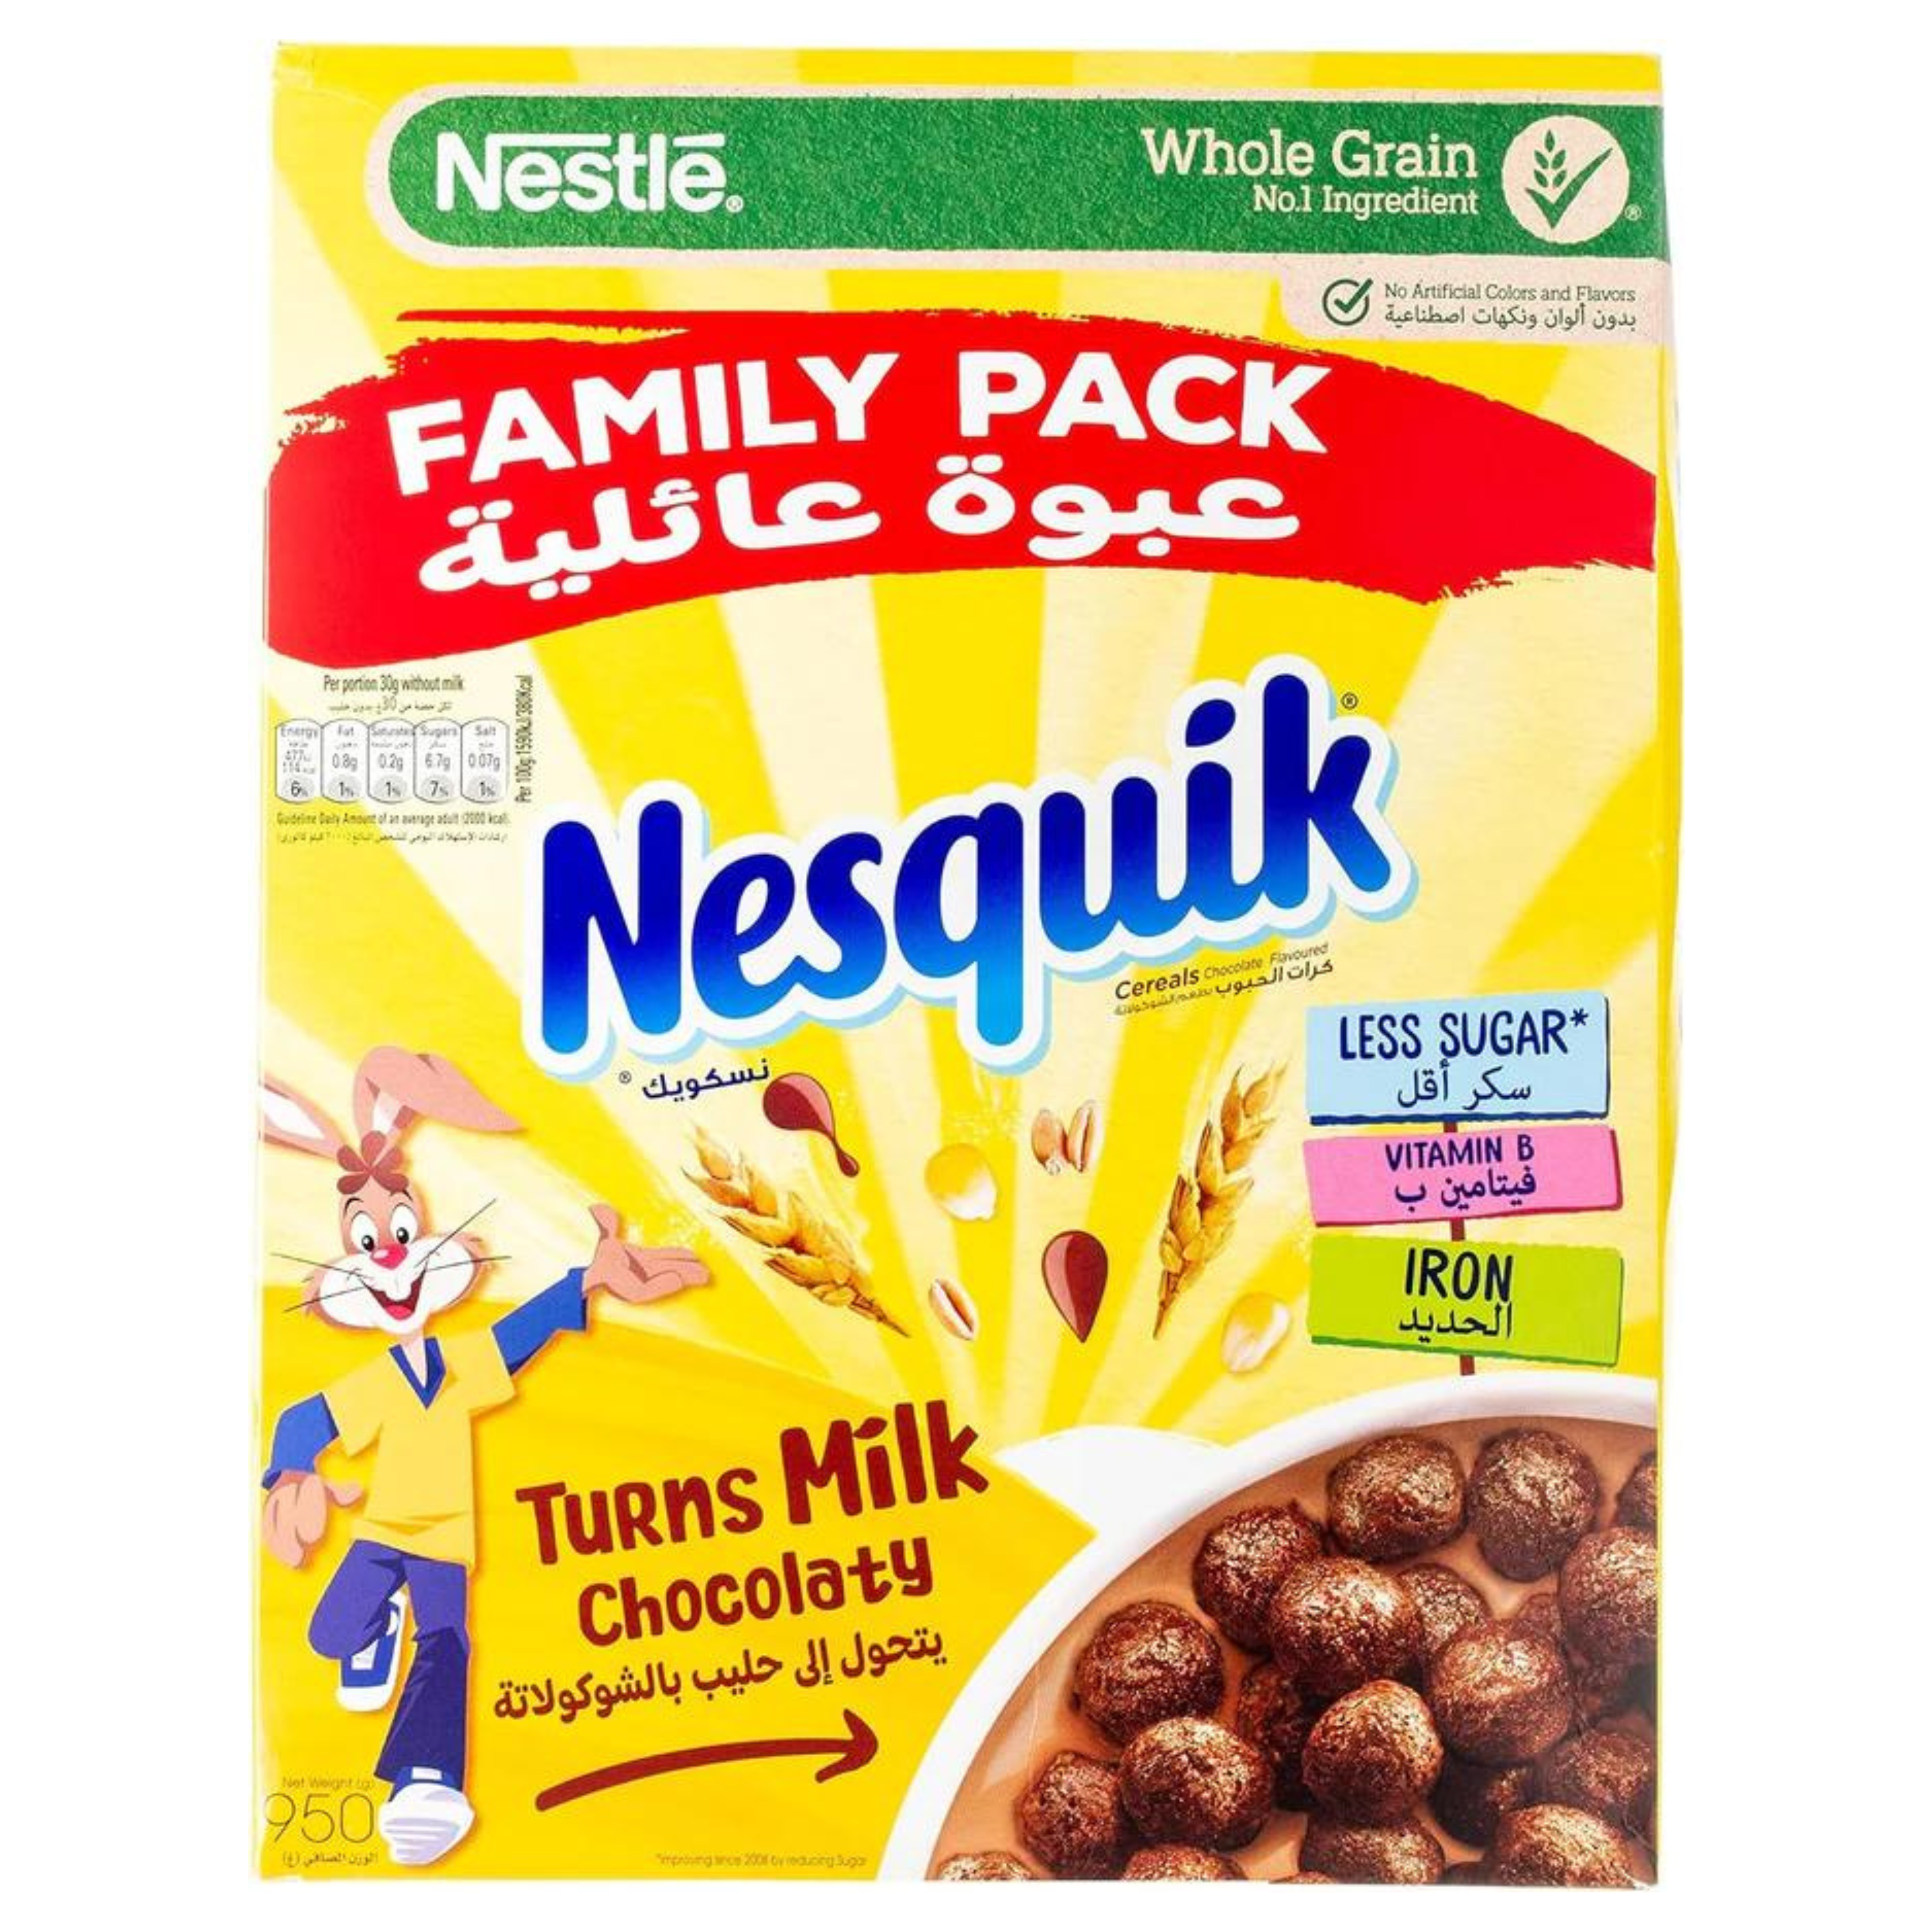 Nestle Nesquik Cereal Chocolate Breakfast Cereal, Family Pack, Made with Whole Grain, 950g